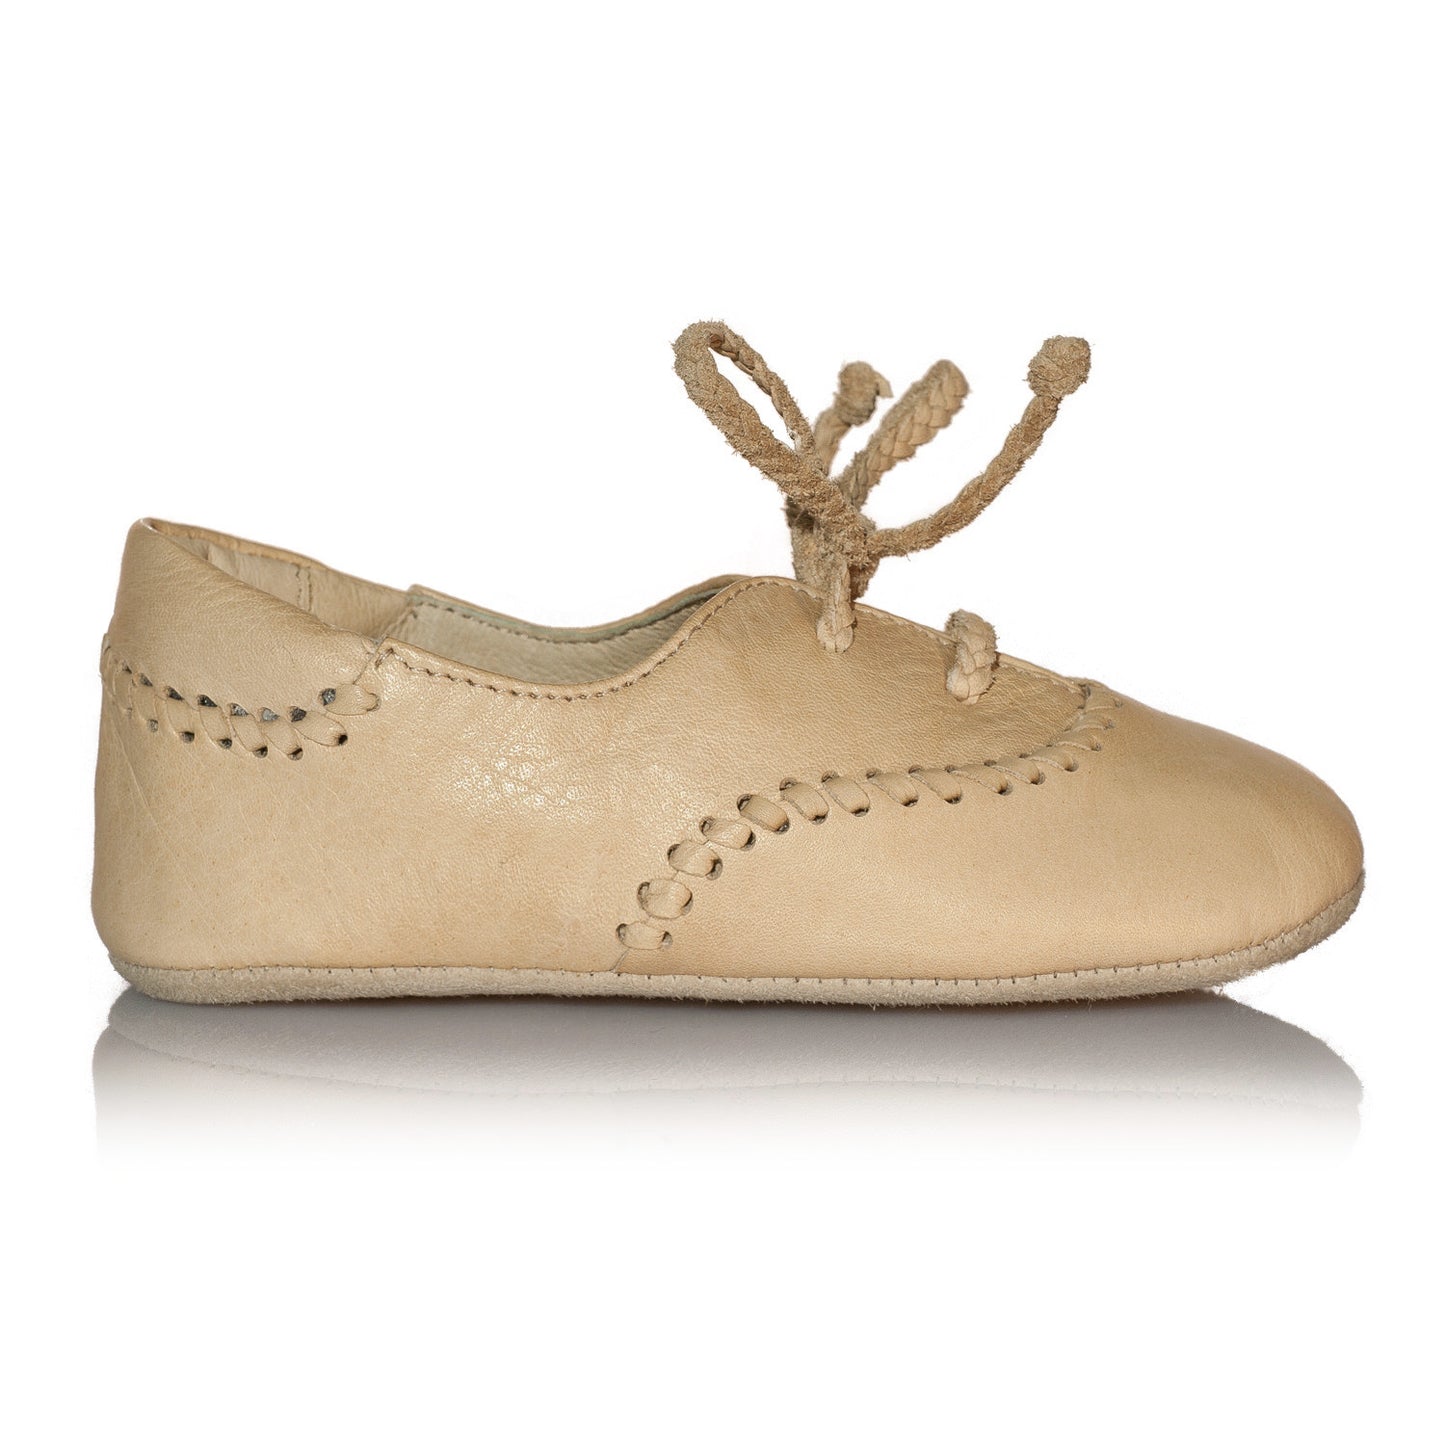 Vibys-Leather-Baby-Oxford-Shoes-with-Whip-Stitch-Trim-and-Braided-Ties-Leslie-side-view